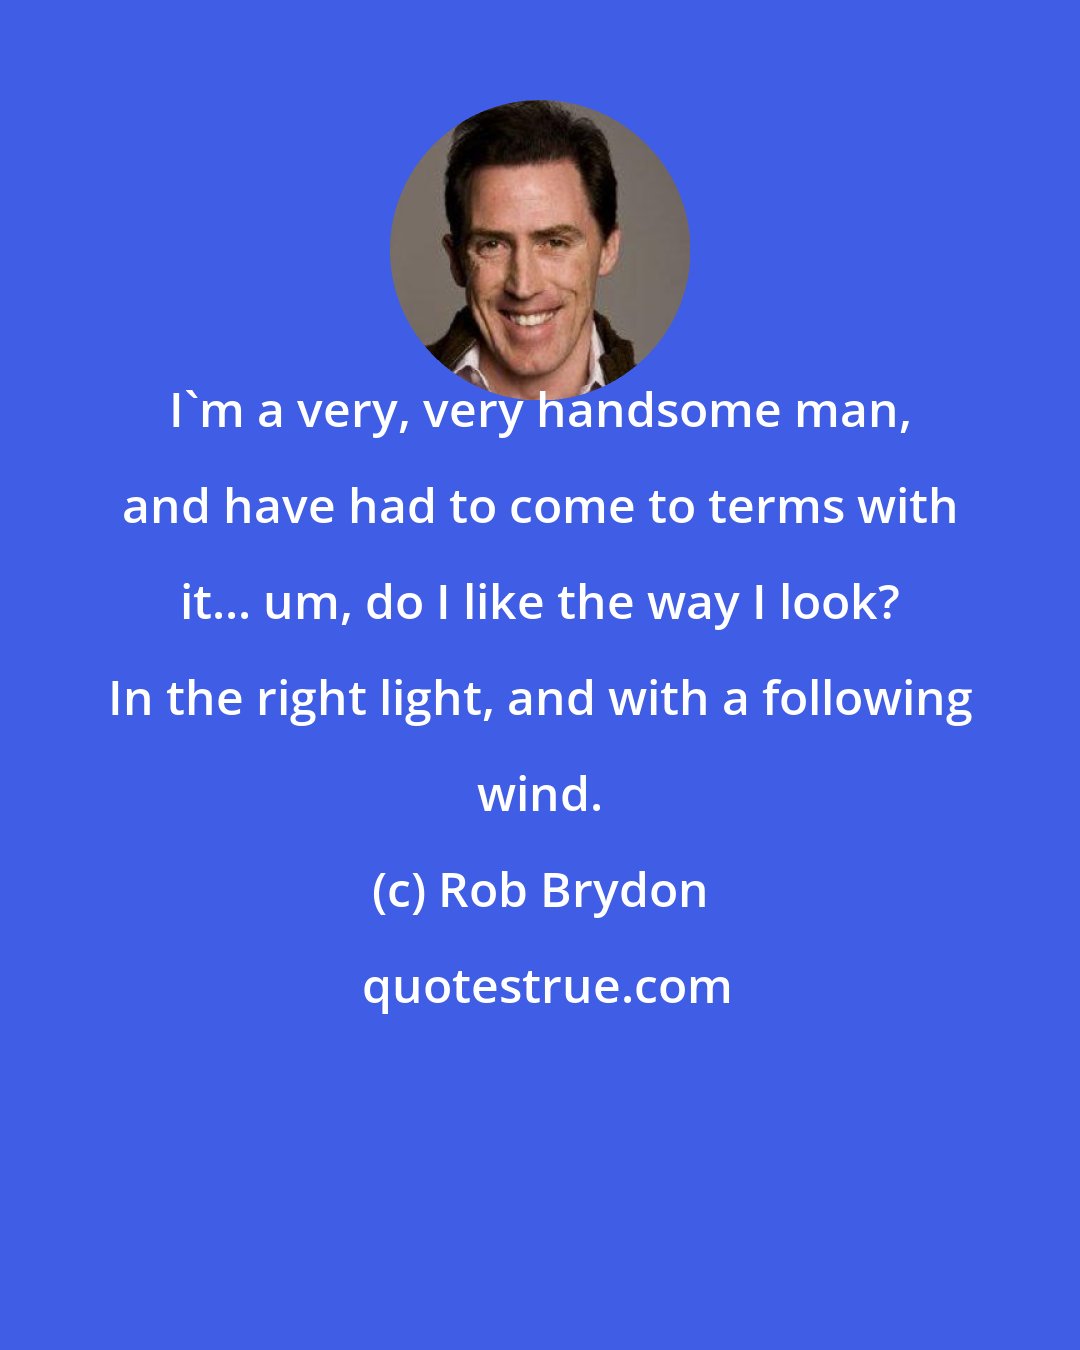 Rob Brydon: I'm a very, very handsome man, and have had to come to terms with it... um, do I like the way I look? In the right light, and with a following wind.